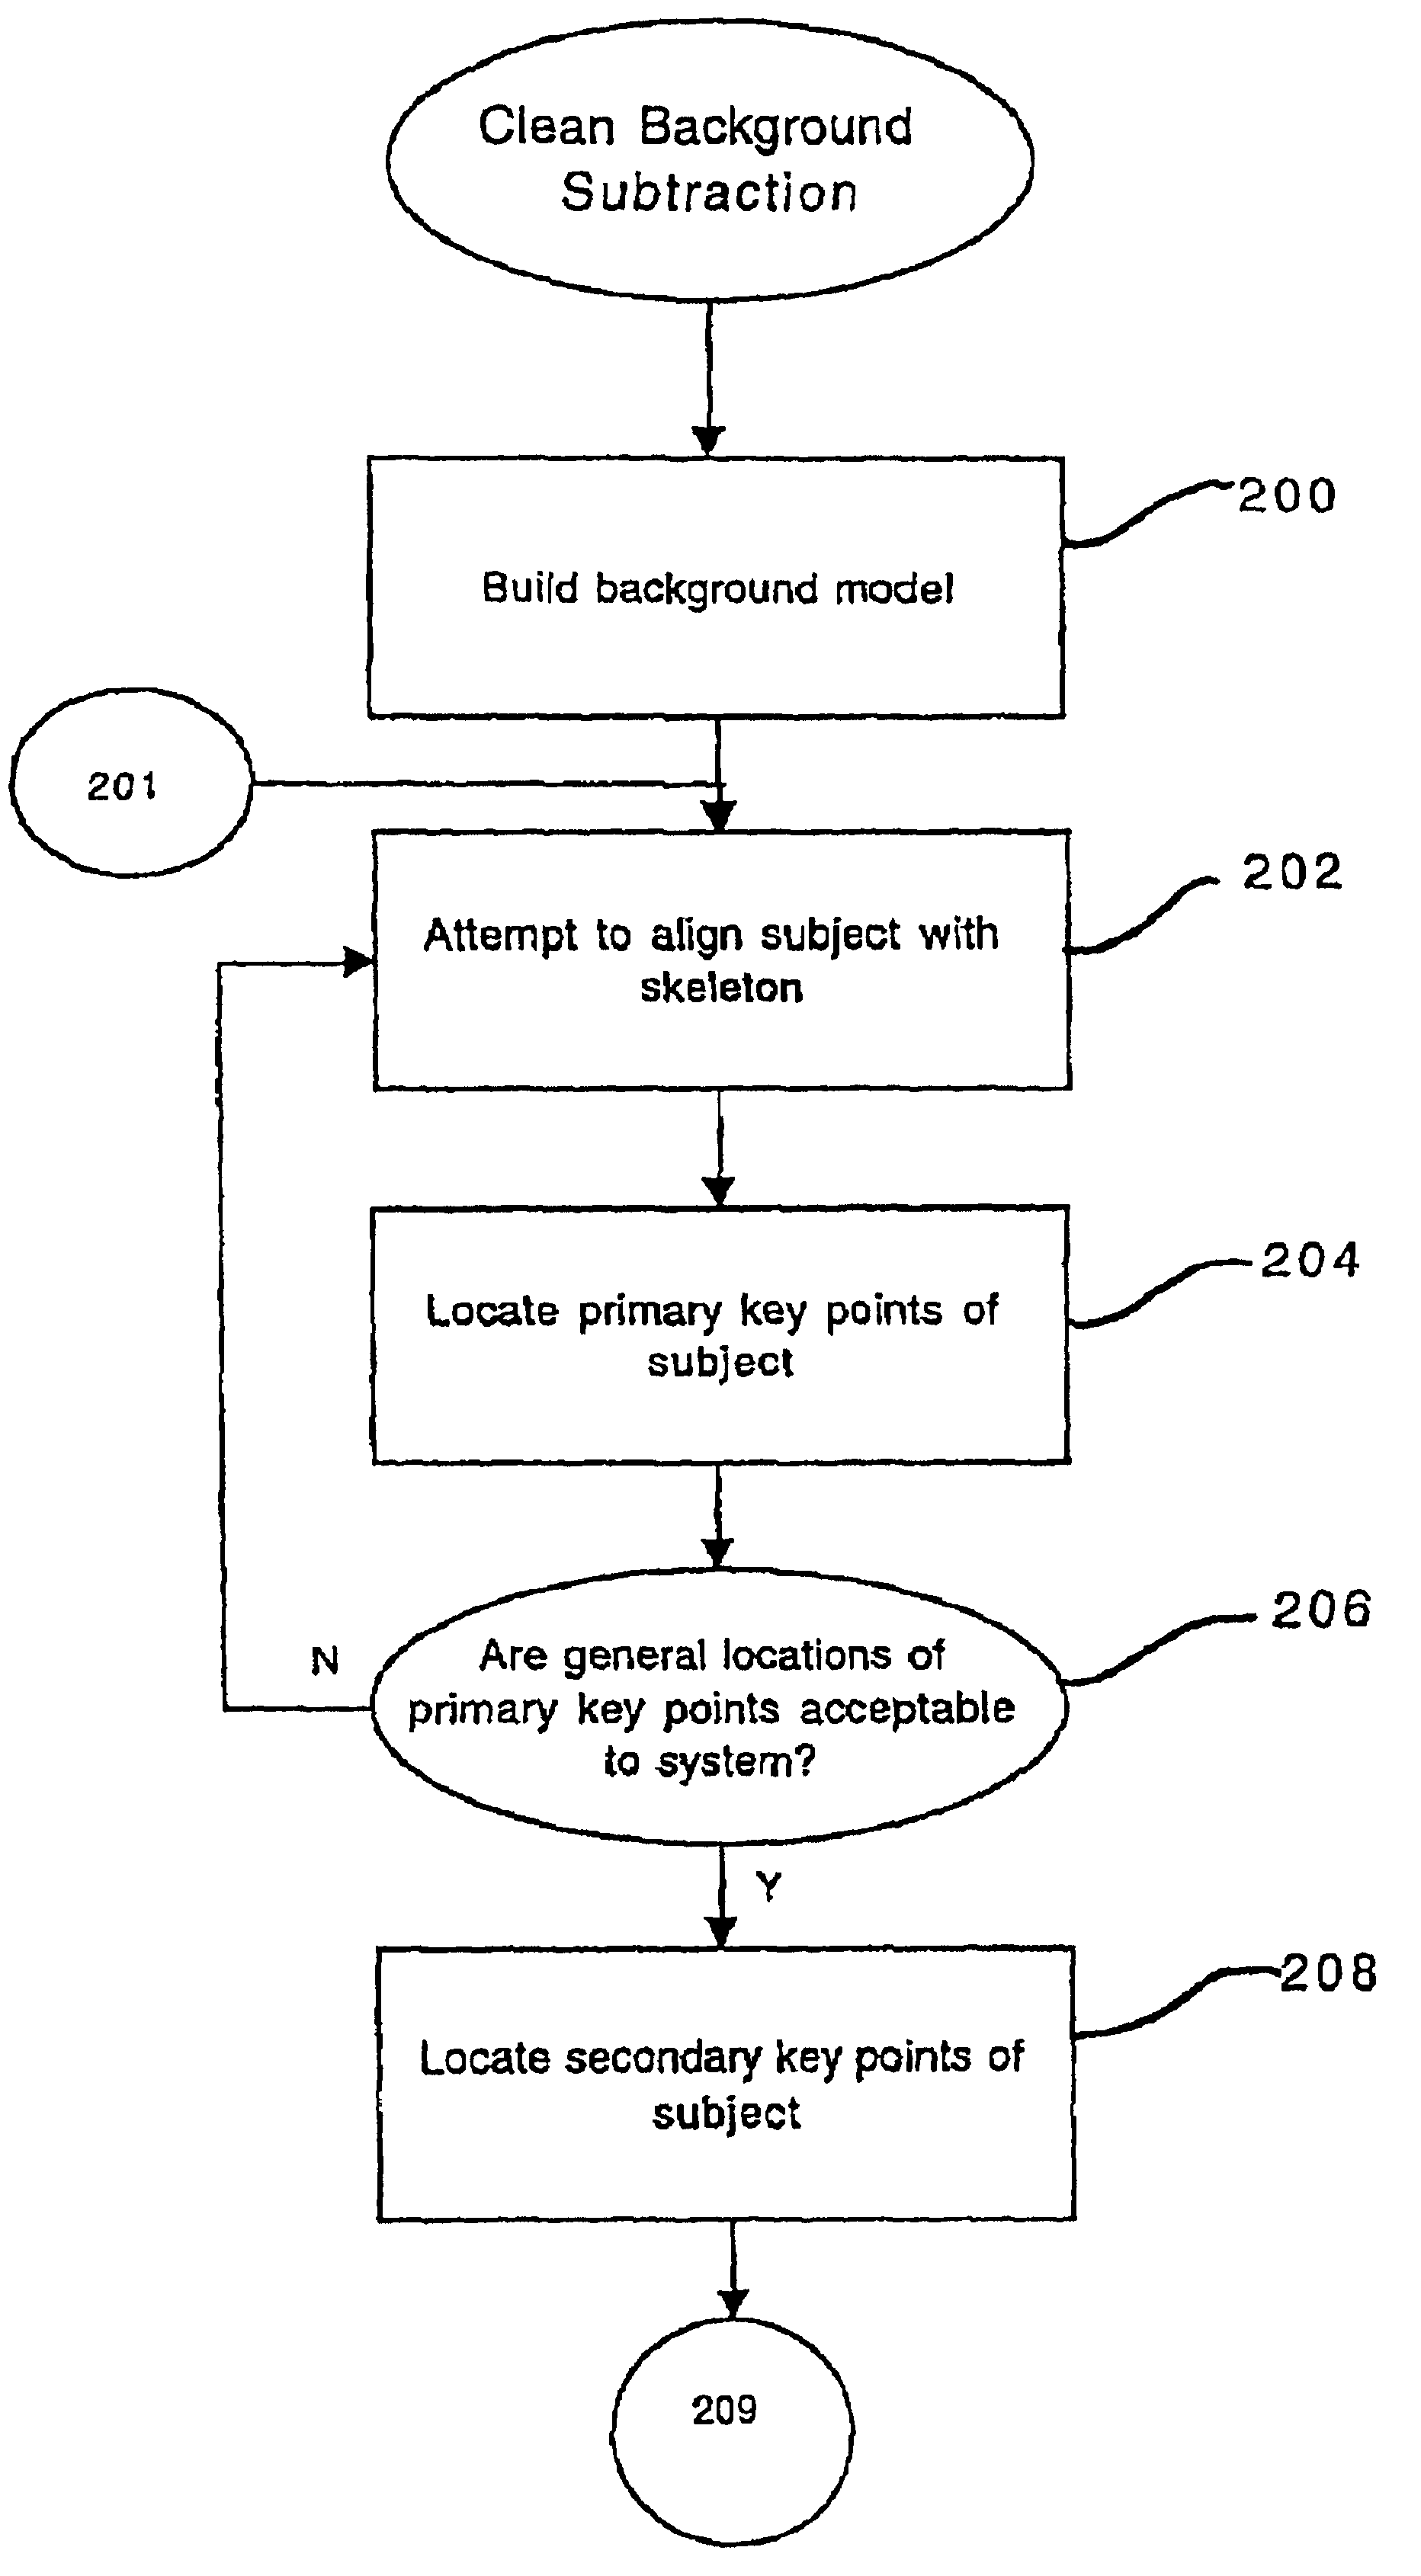 Method and apparatus for performing a clean background subtraction